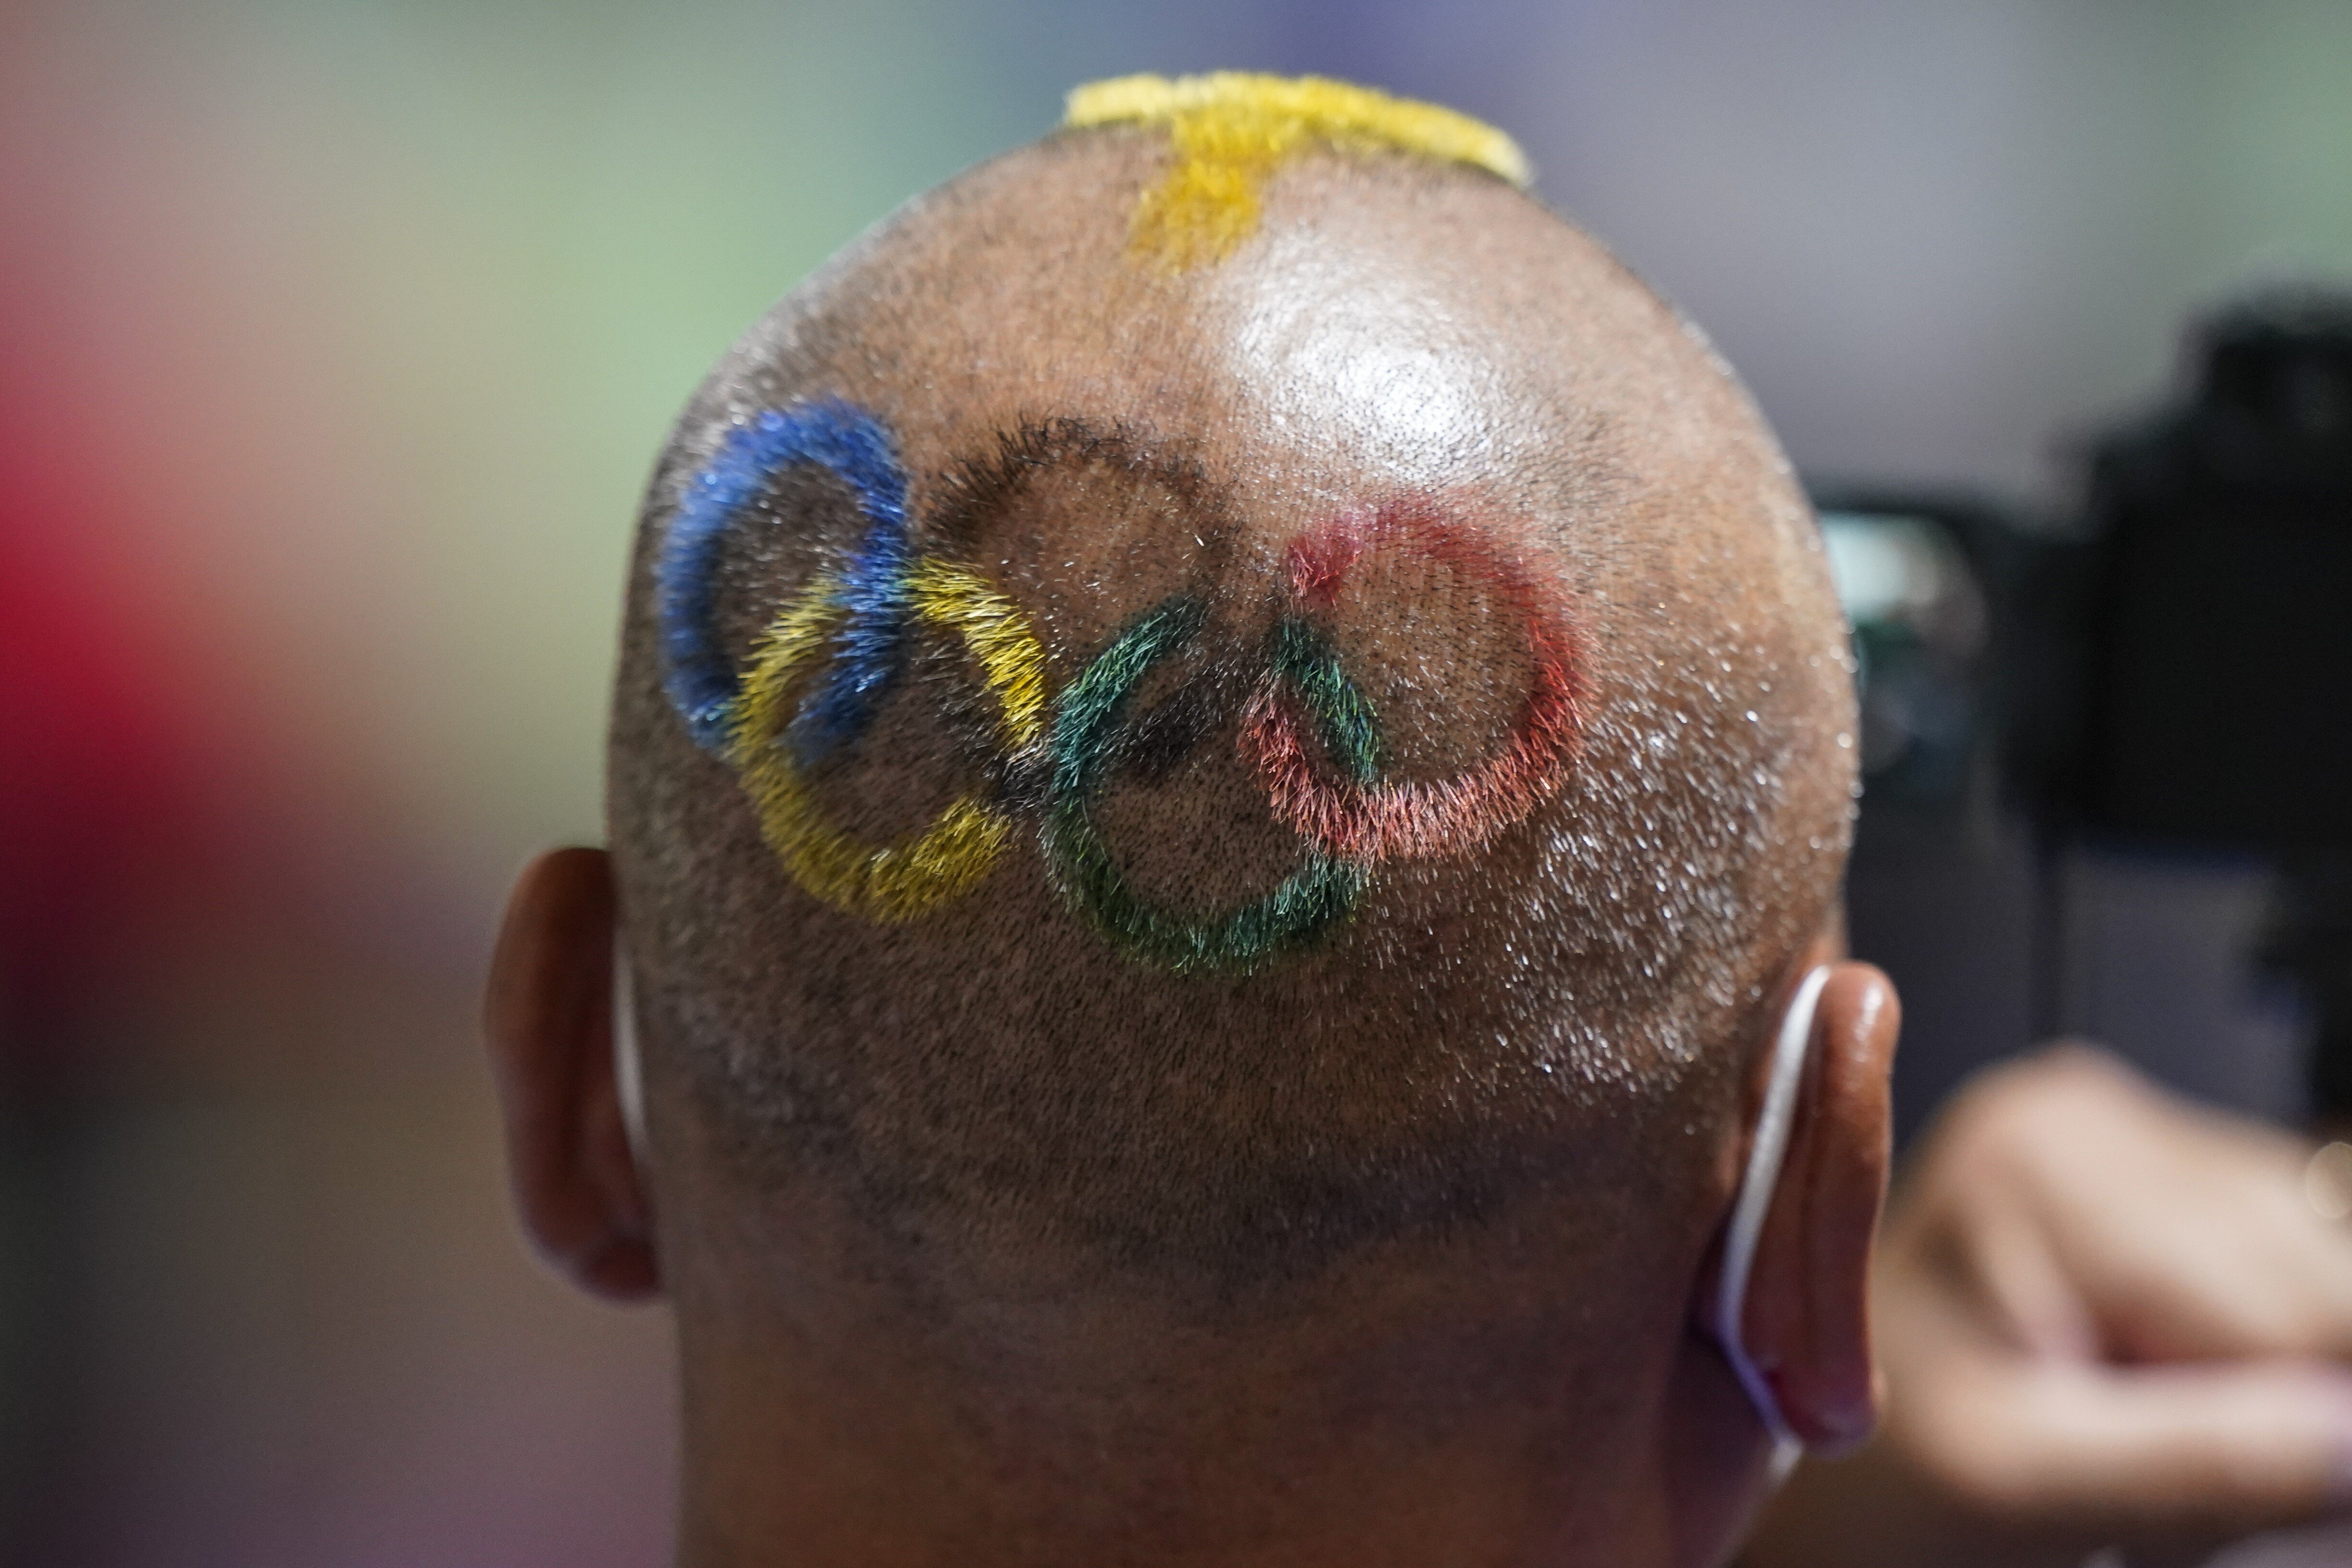 Mongolian coach Undralbat Lkhagva has the Olympic rings cut and dyed into his hair as he watches the women’s 10m air pistol at the Asaka Shooting Range in Tokyo. Photo: AP Photo